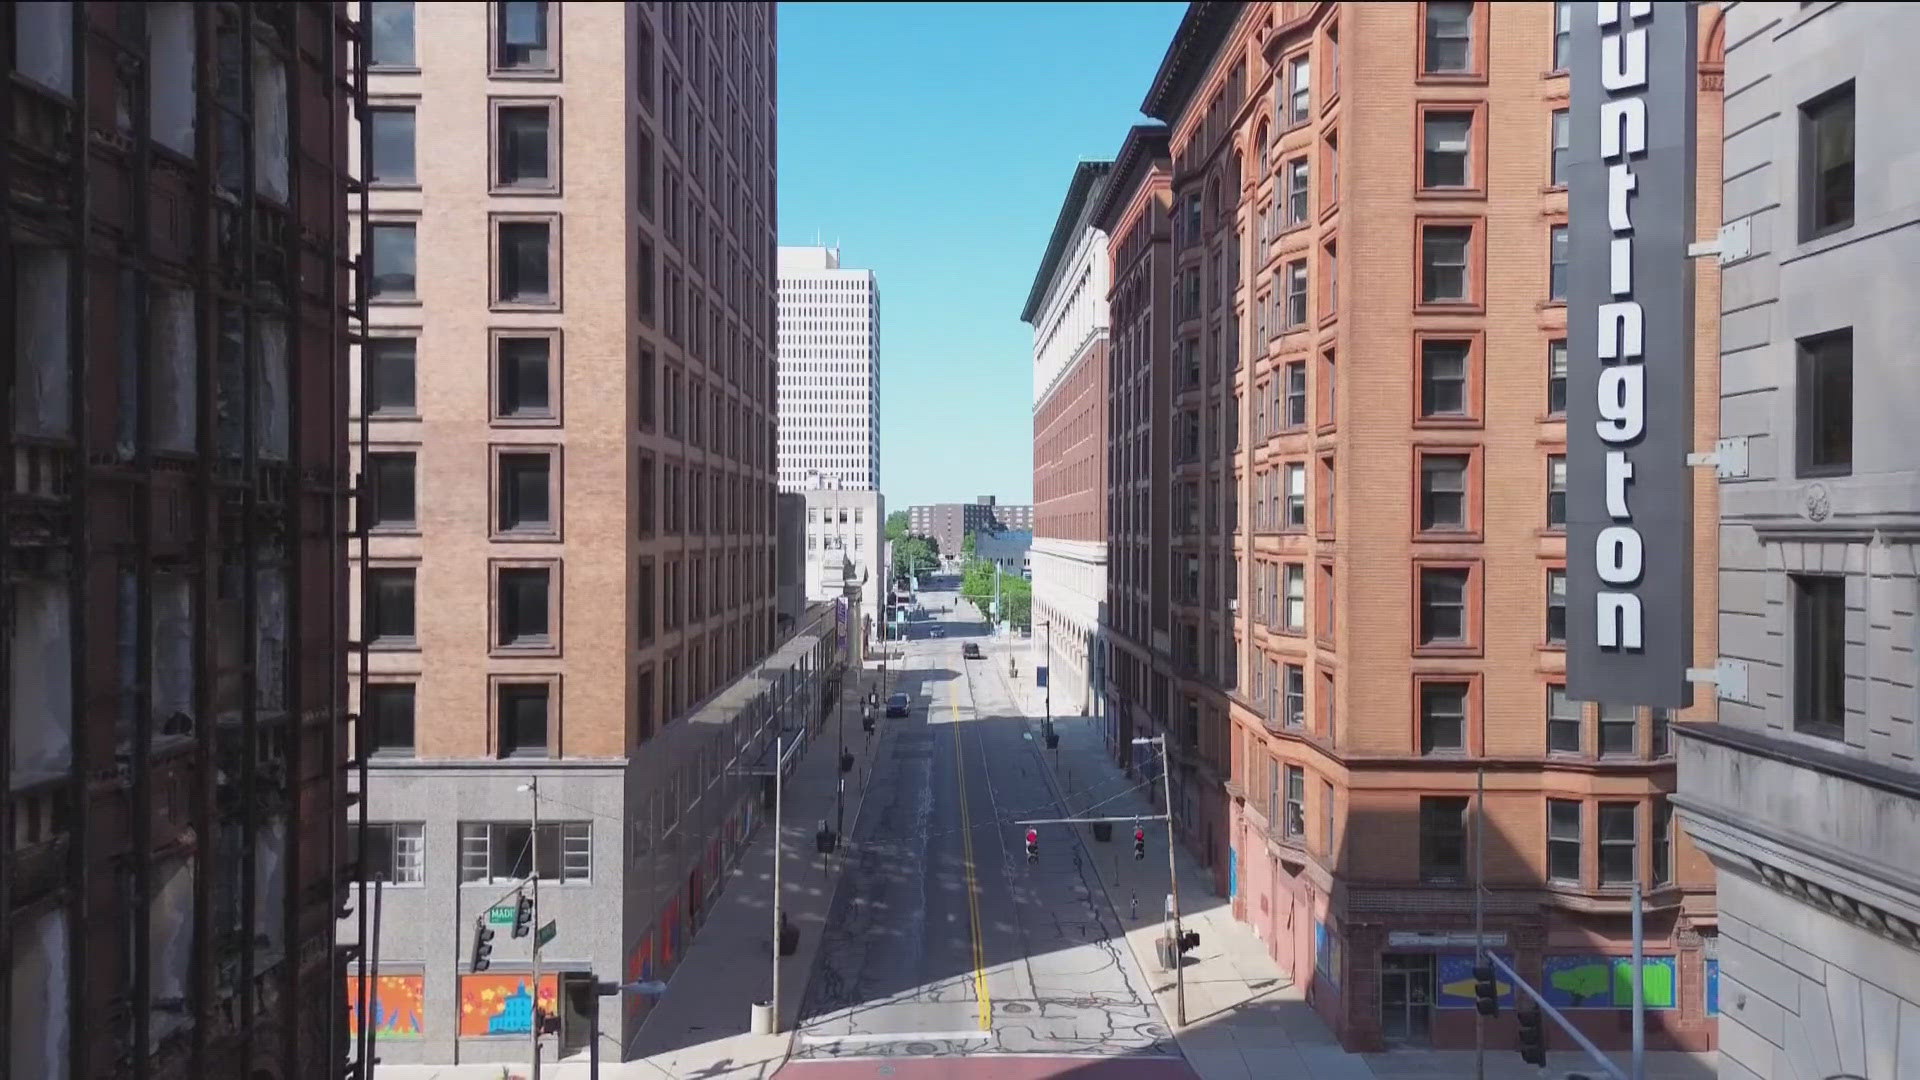 Plans to revitalize downtown Toledo don't stop with the much-talked-about Four Corners project at Huron Street and Madison Avenue.